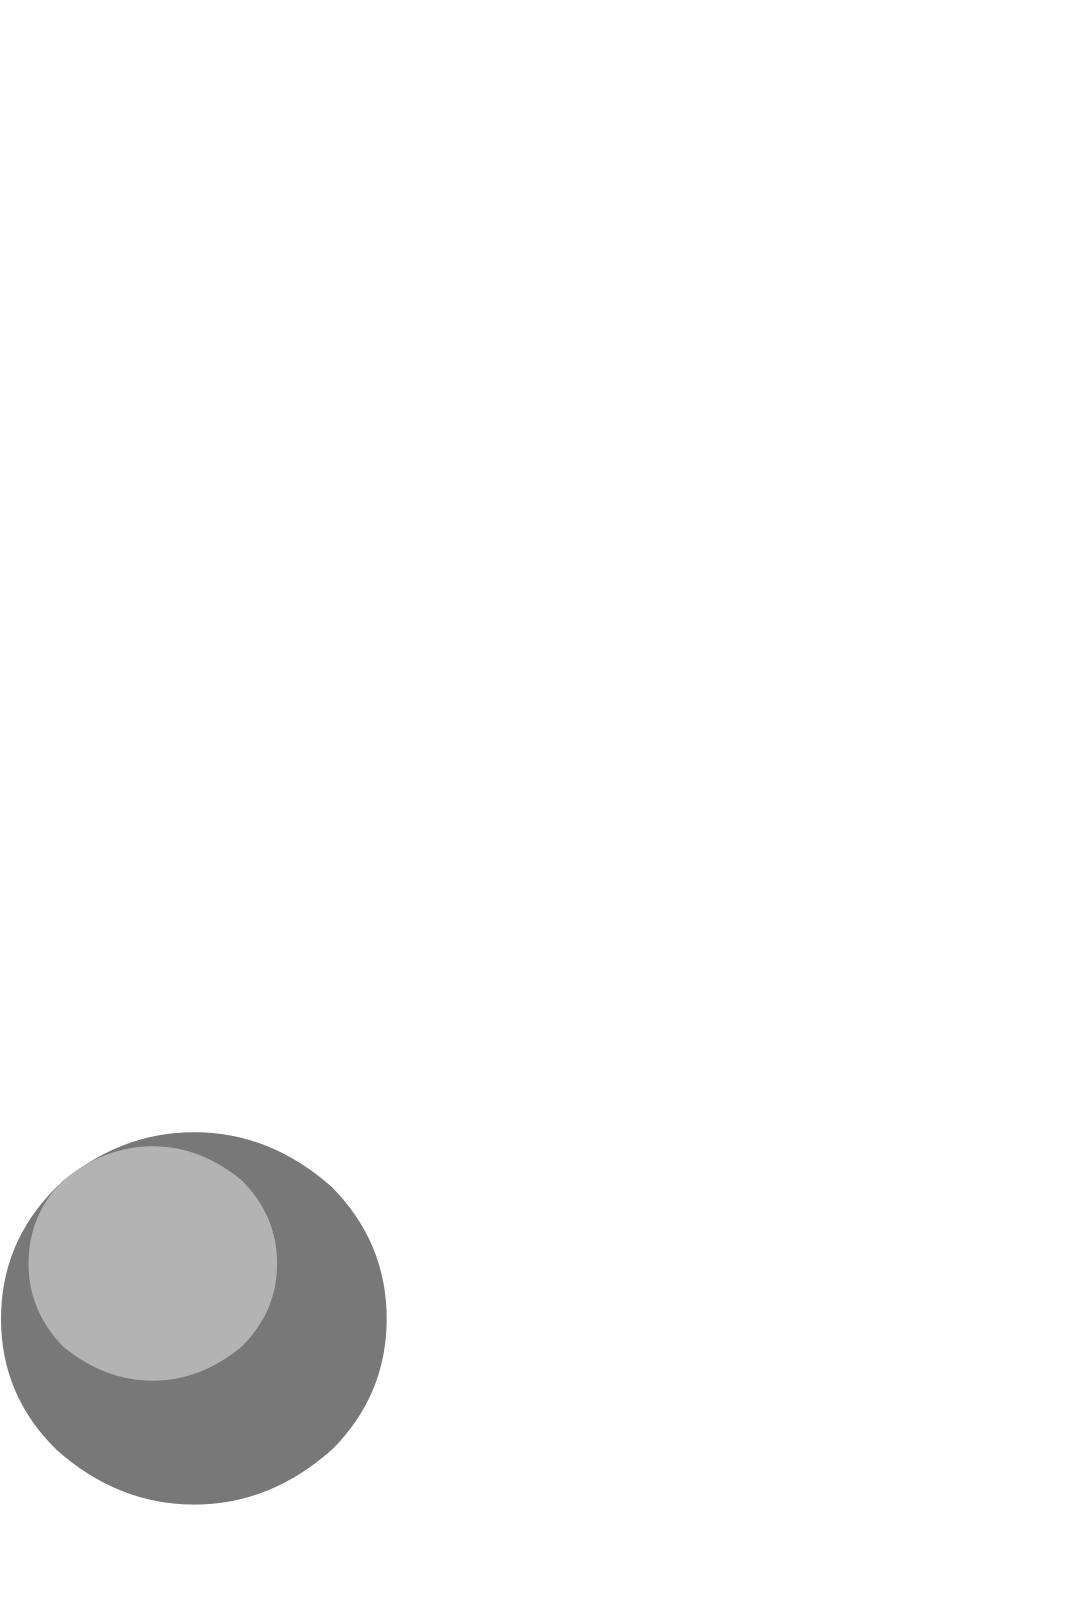 A Grey And Black Background With A White Ball